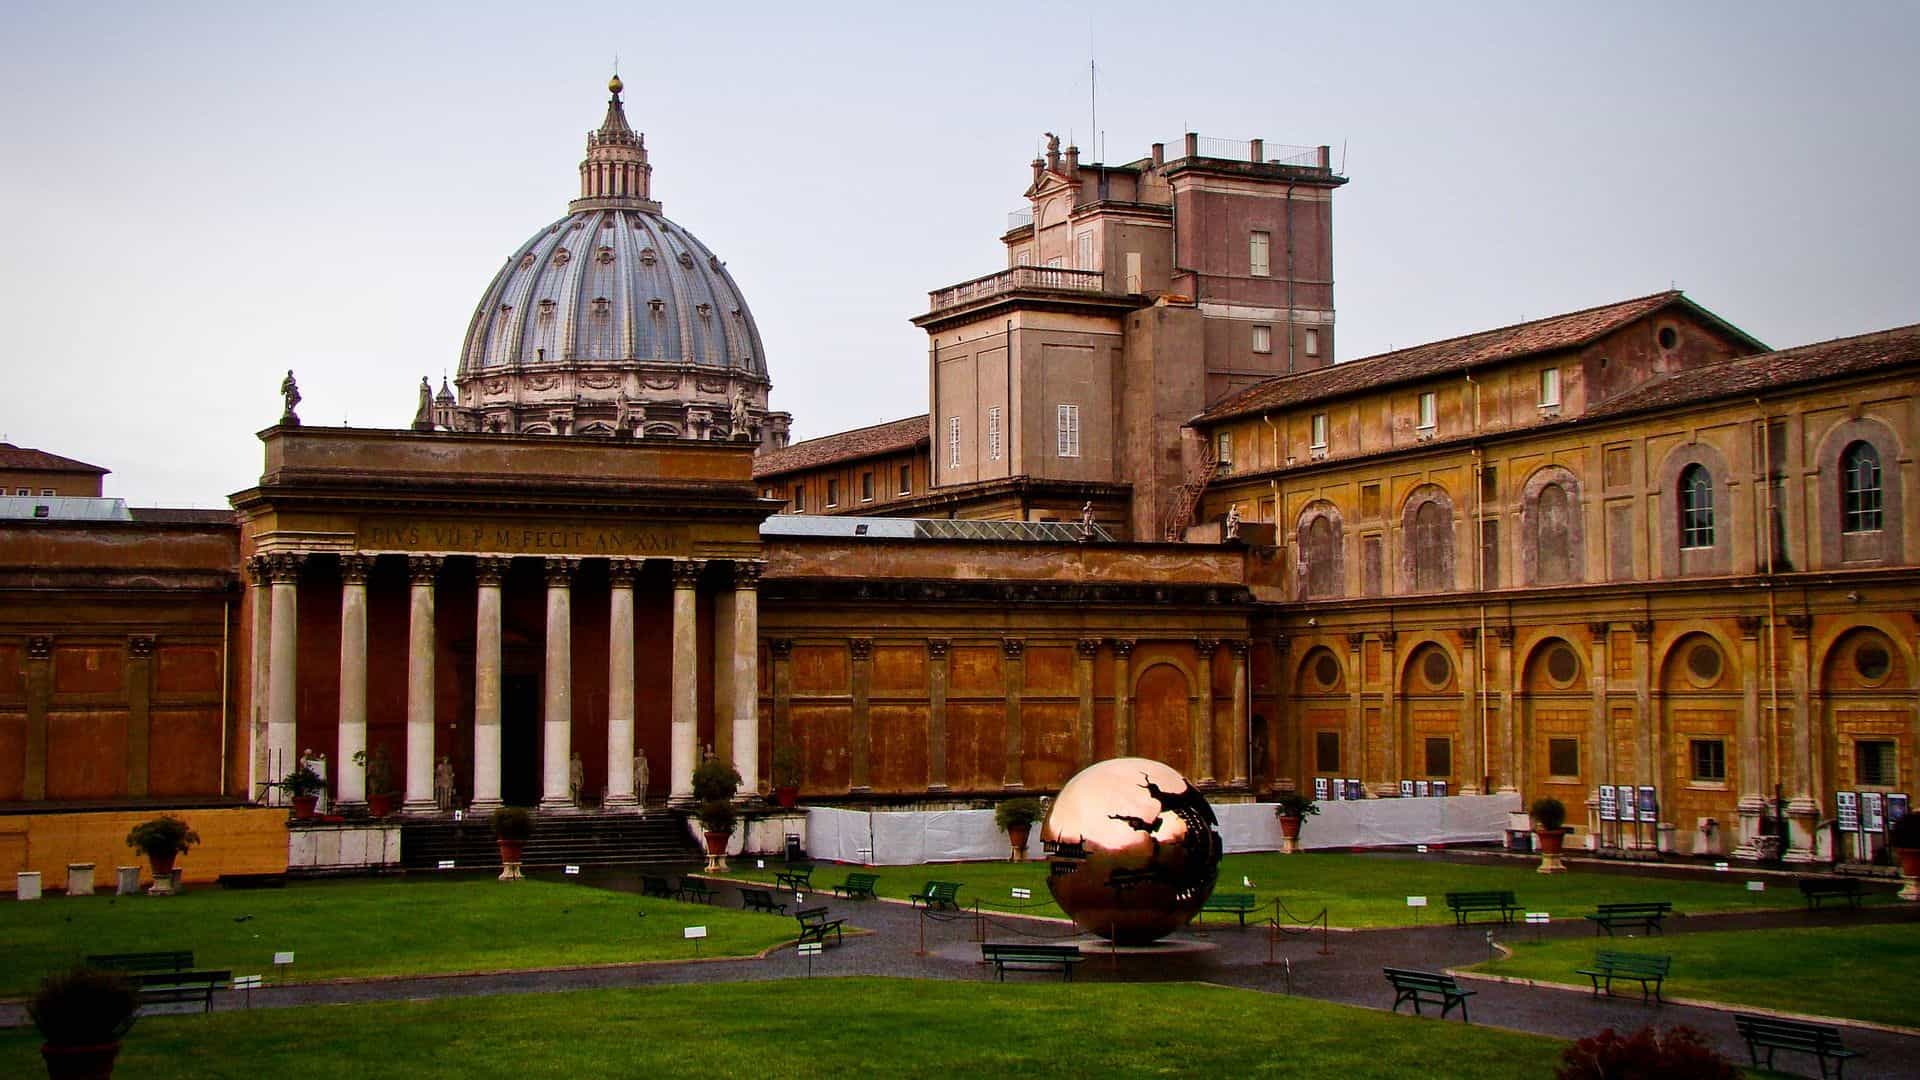 Vatican Musuems dome building and gardens in Rome